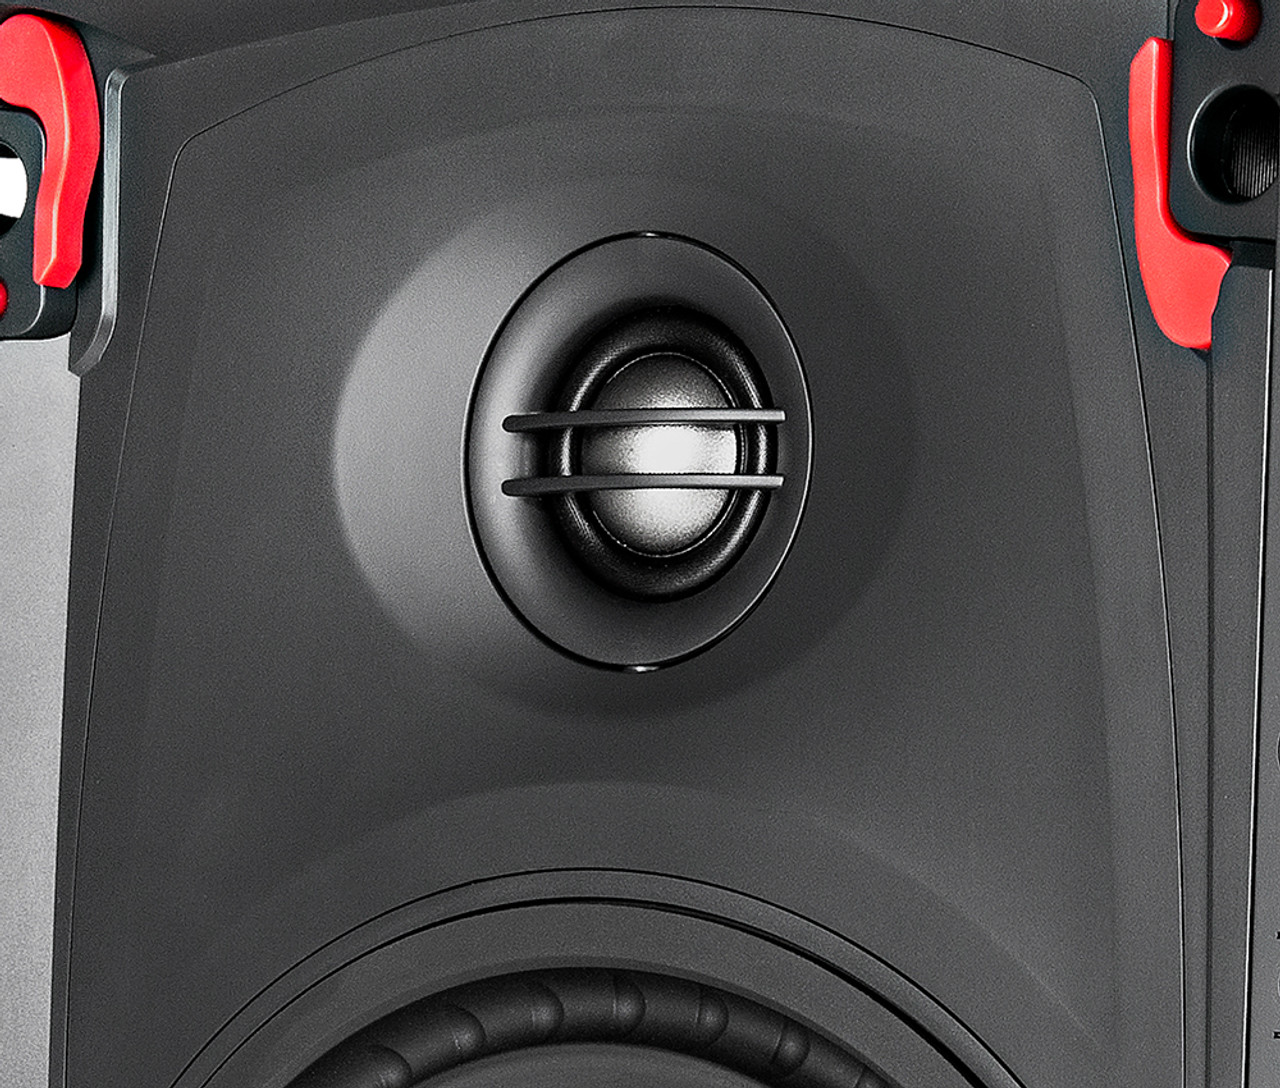 Episode Signature 5 Series 8" In-Wall Speaker (Each)